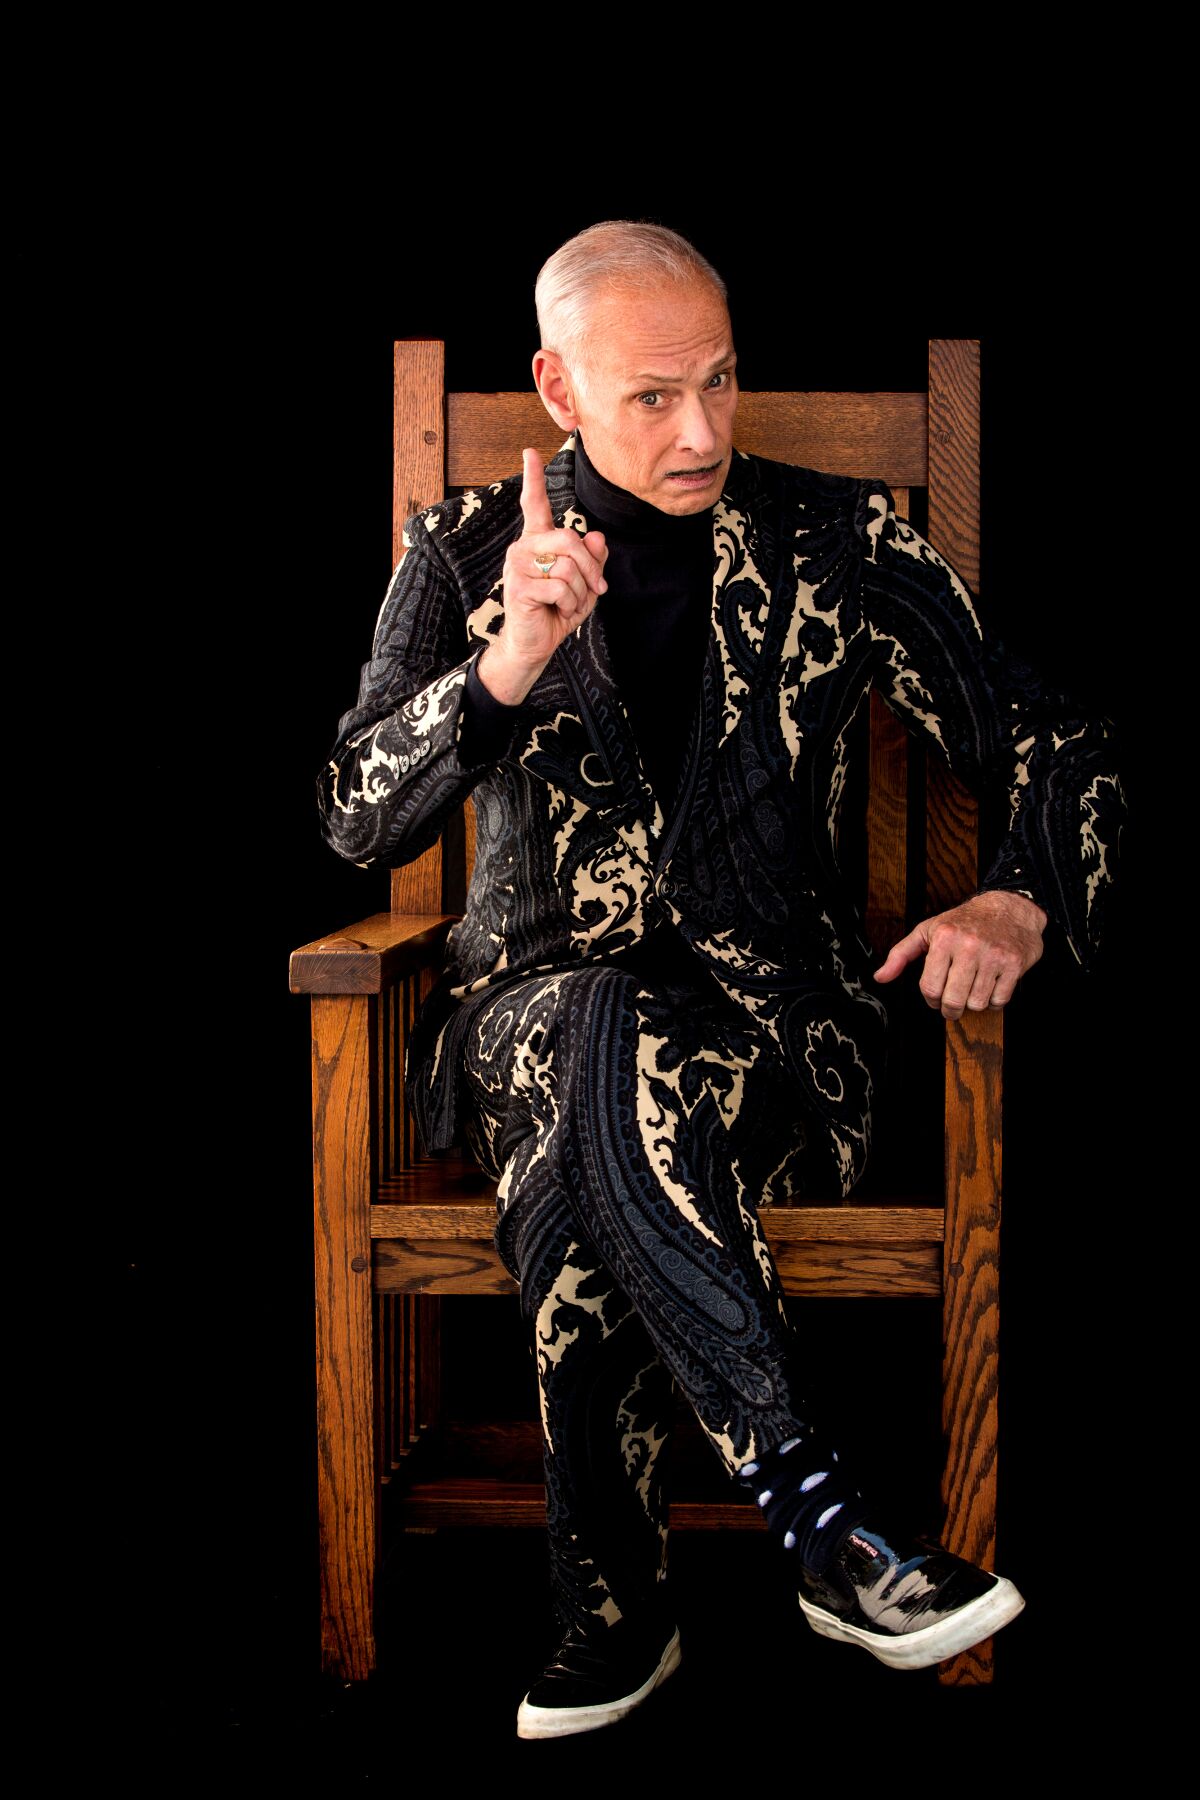 man in patterned suit sits in large wooden chair and wags his finger 